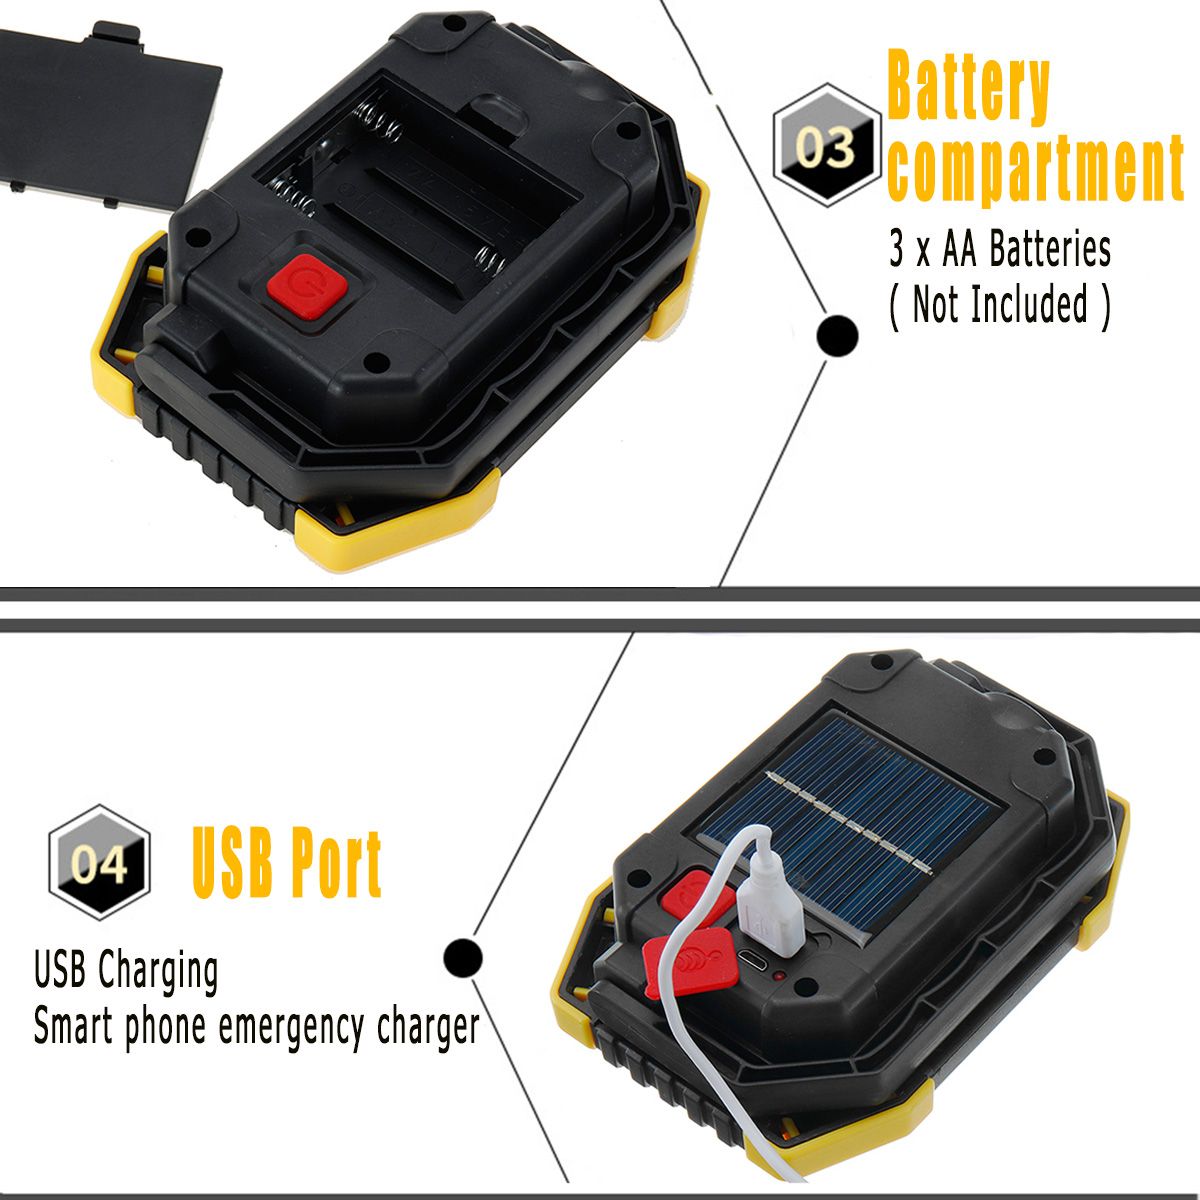 Portable-SolarBattery-Powered-COB-LED-Flood-Work-Light-for-Outdoor-Camping-Hiking-Emergency-Car-Repa-1649955